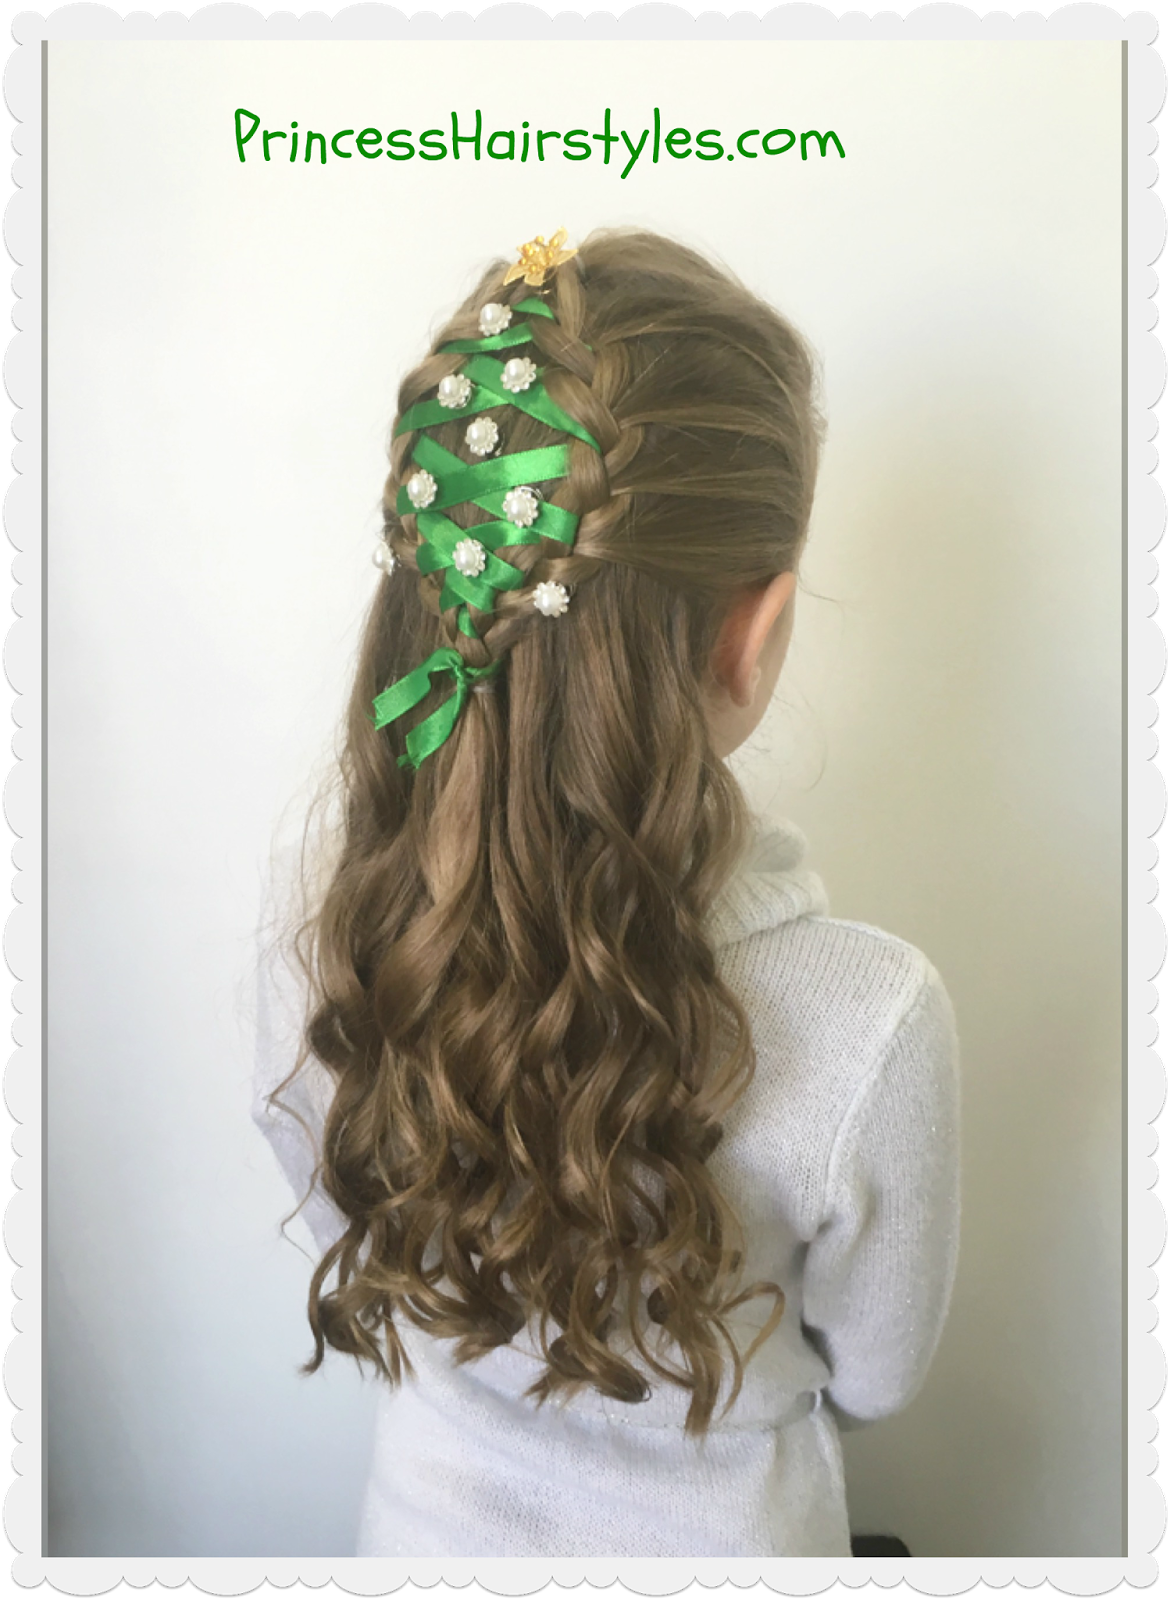 Christmas Tree Hairstyle Hairstyles For Girls Princess Hairstyles